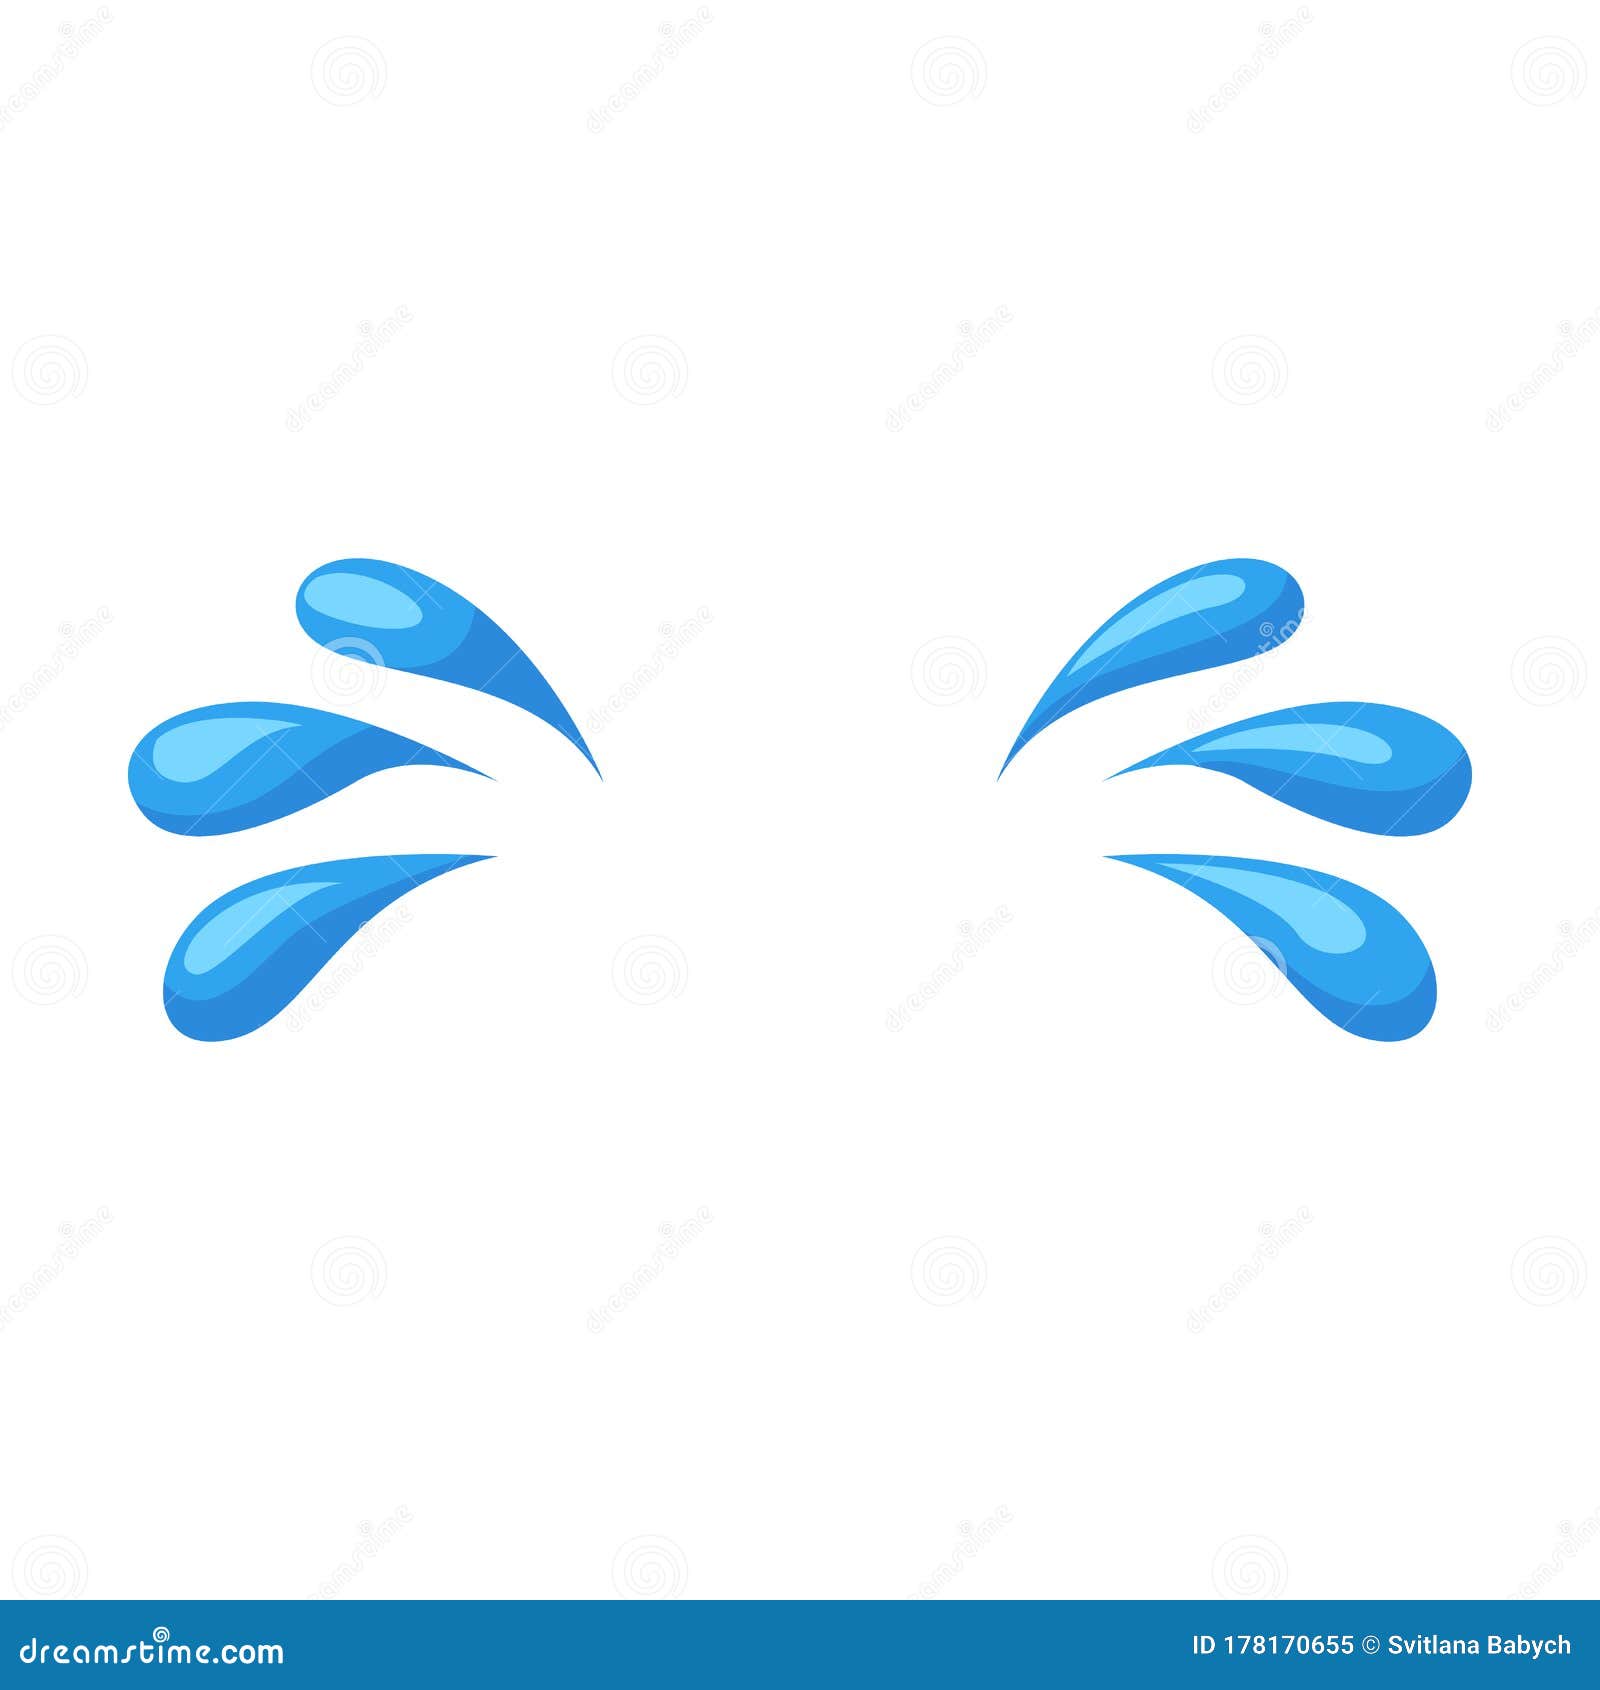 Tears Vector  Vector Icon Isolated on White Background Tears.  Stock Vector - Illustration of blue, clean: 178170655